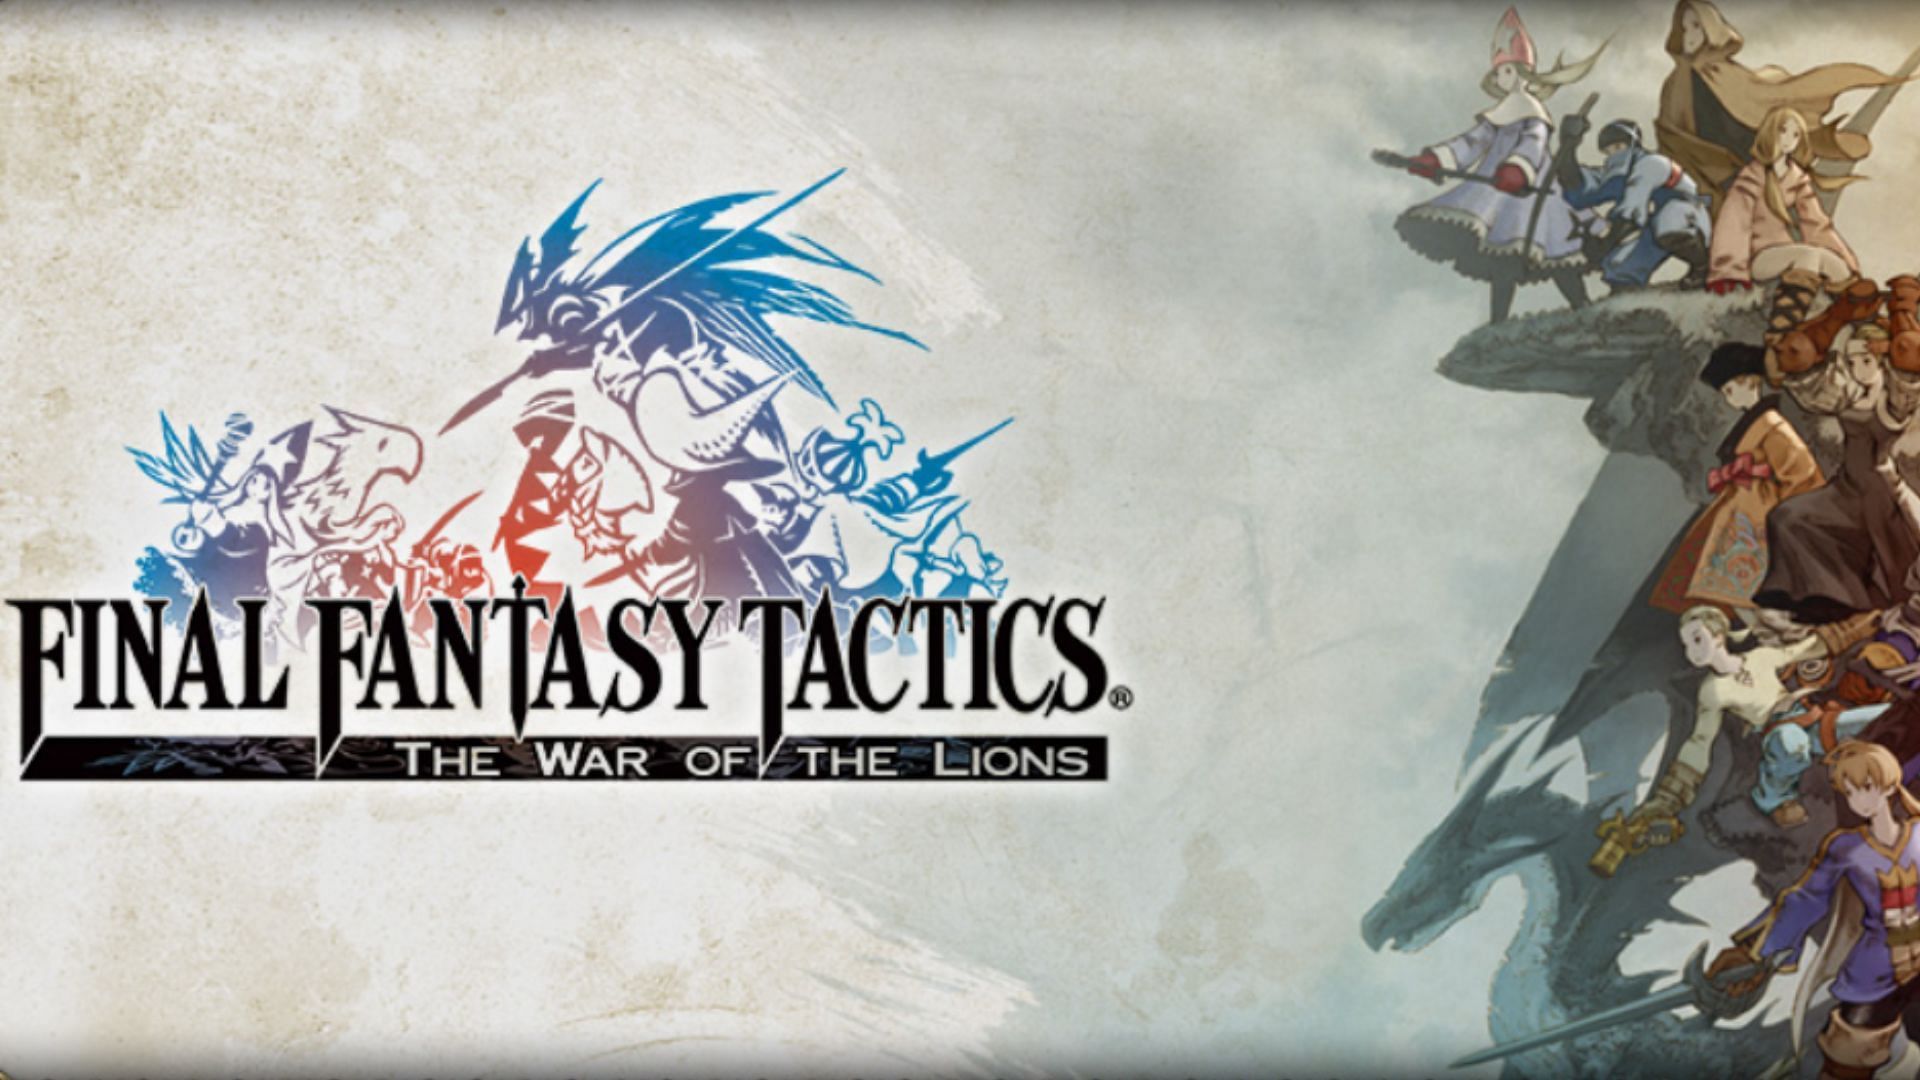 Final Fantasy Tactics: The War of the Lions offers a deep storyline and great fights (Image via Square Enix)